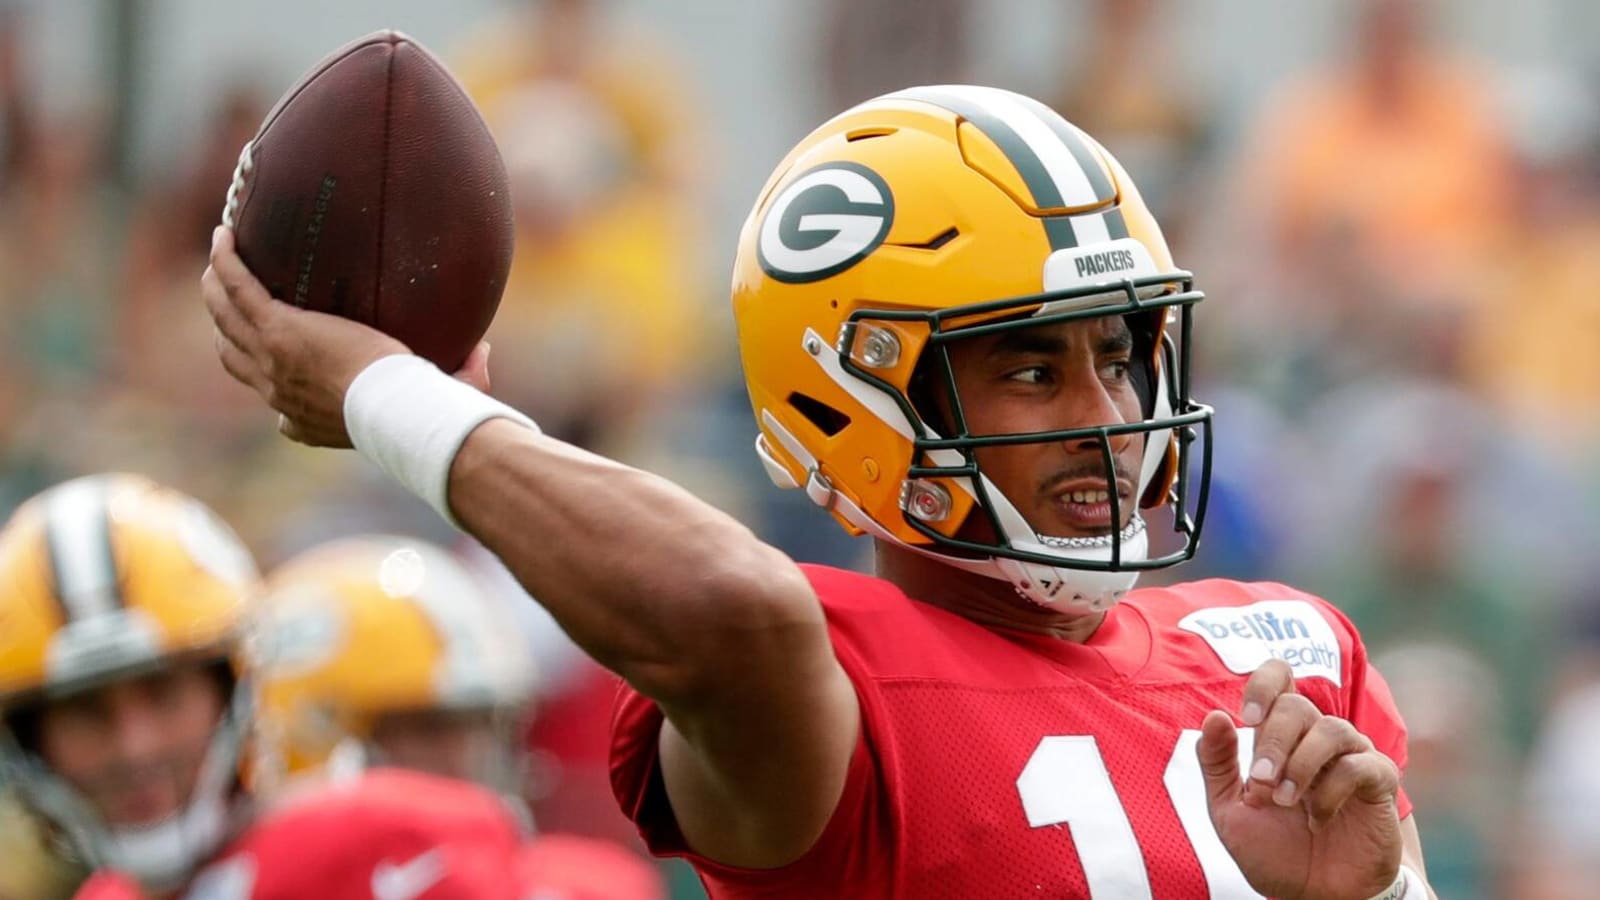 Hall of Fame QB gave Packers' Love 'gems' at training camp